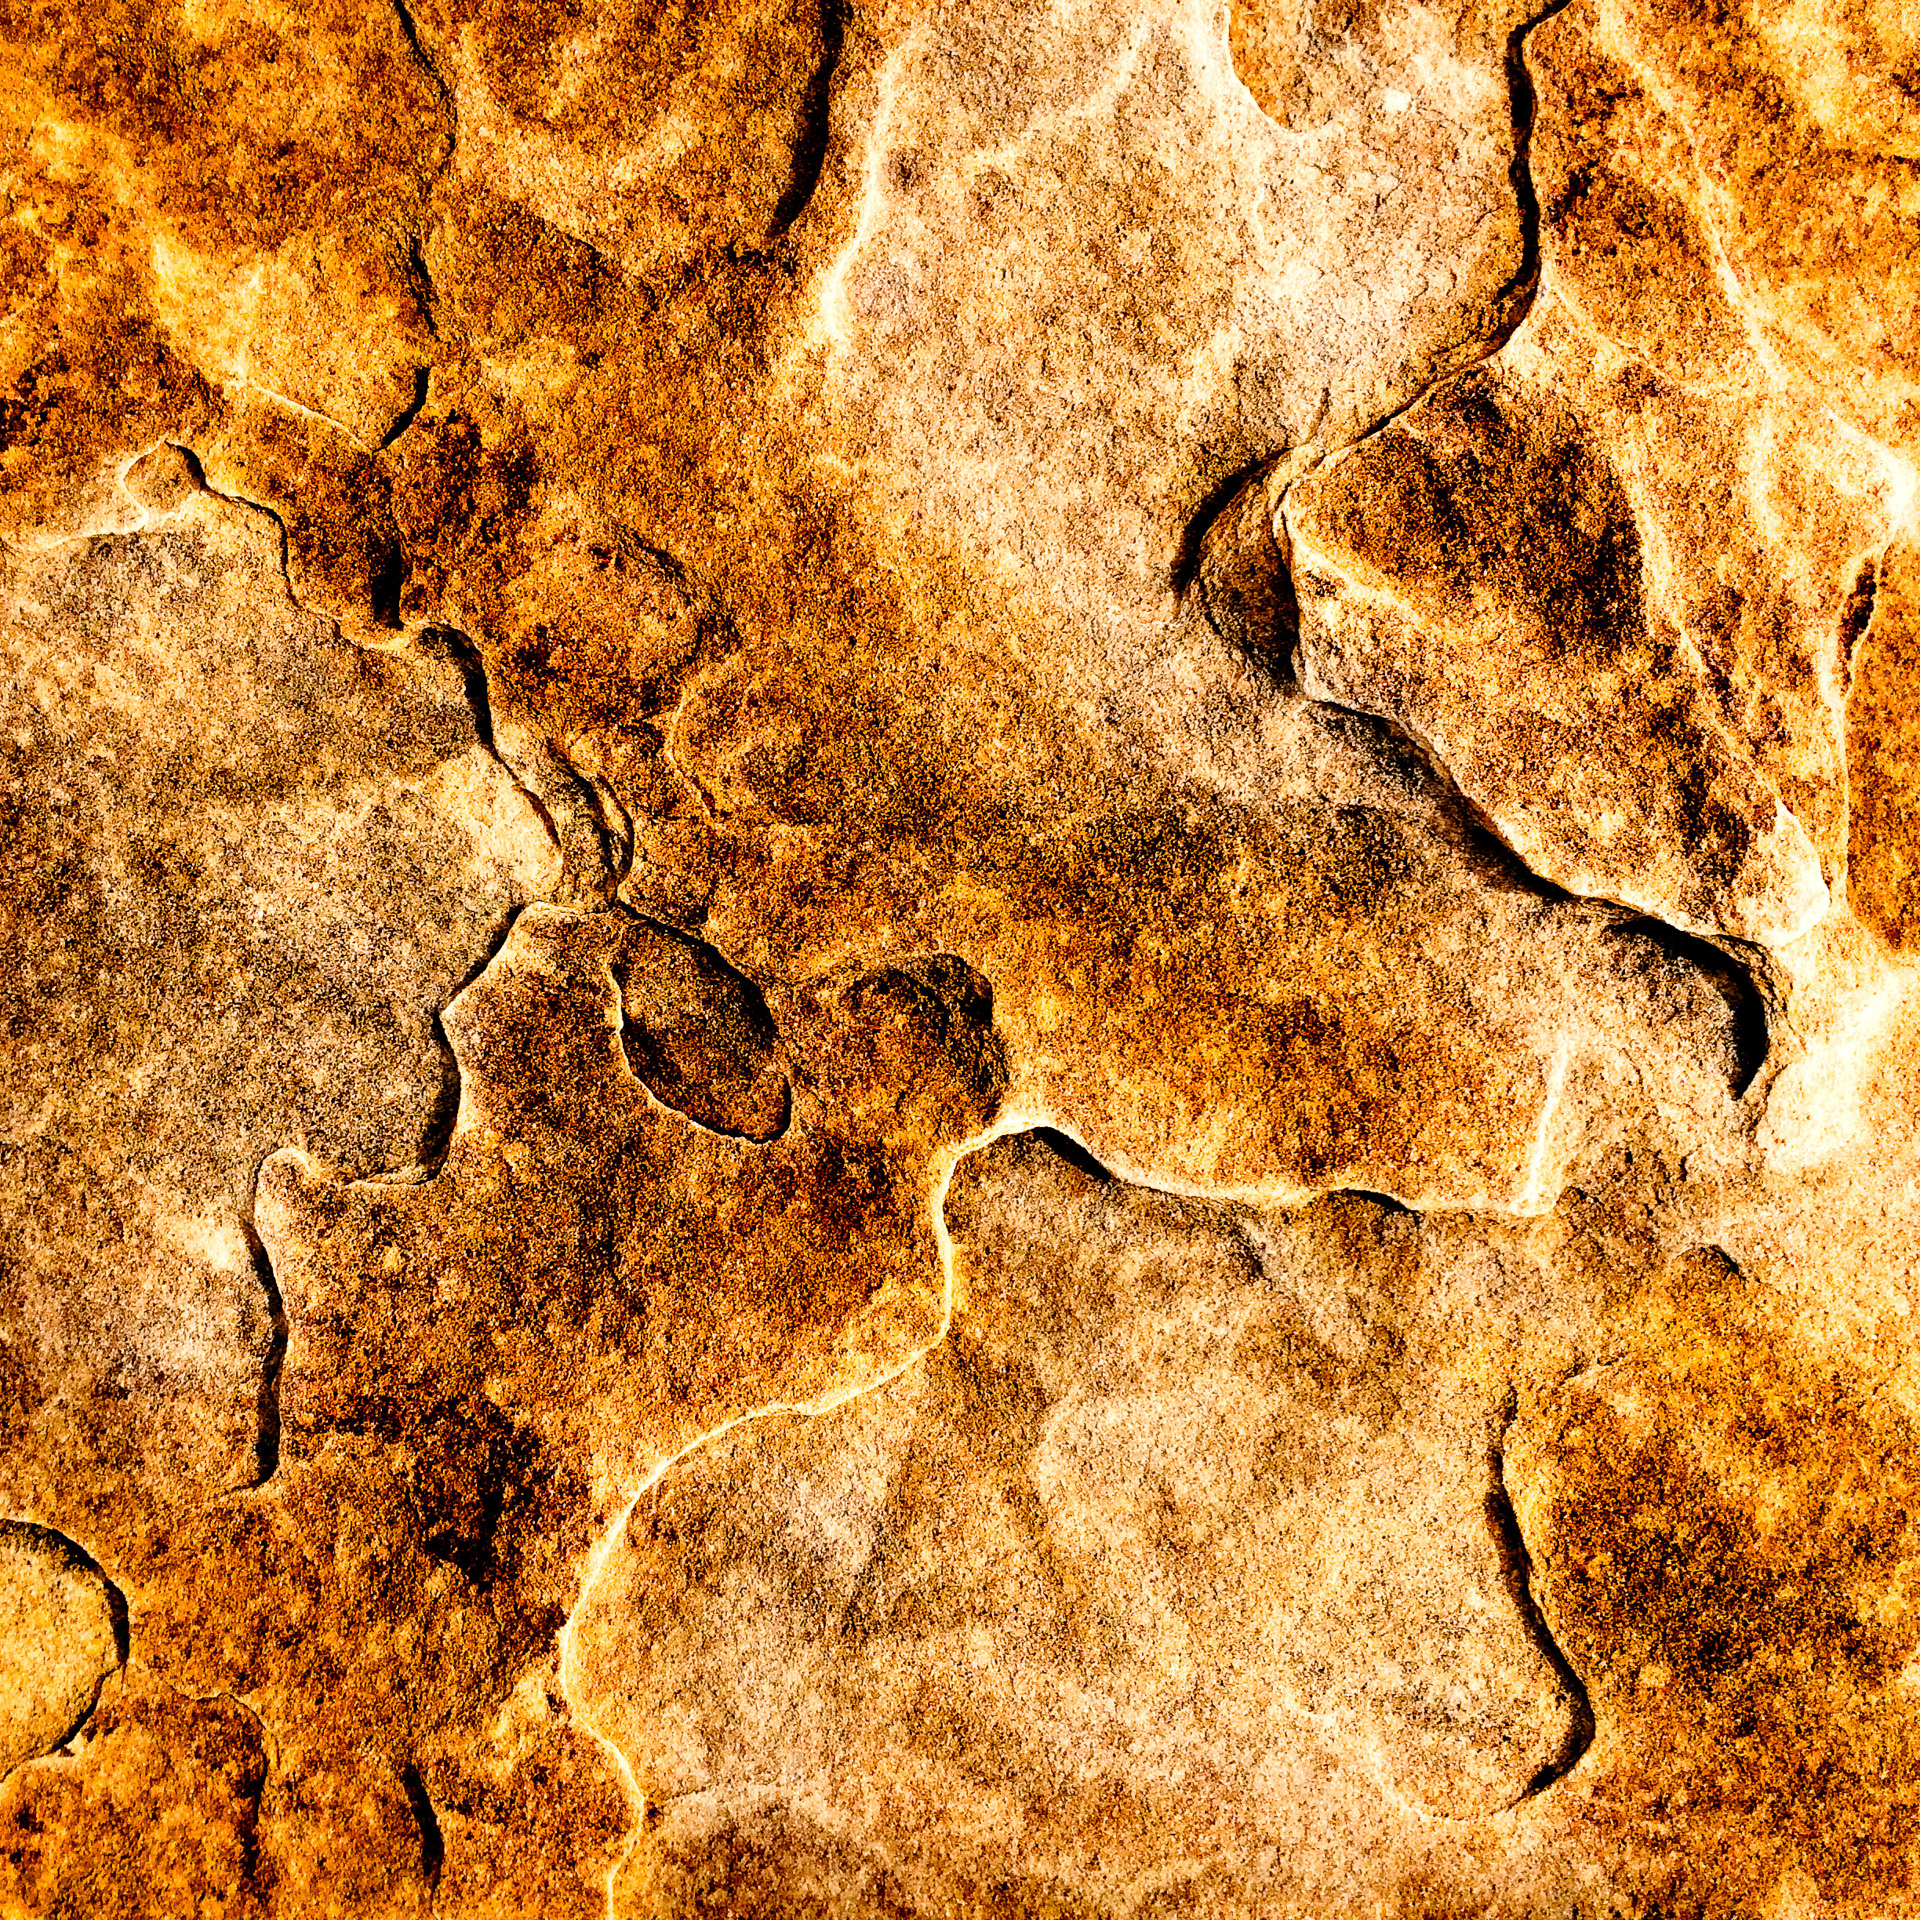 Moss Image, Chris Moss, picture of a sandstone rock yellow and gold